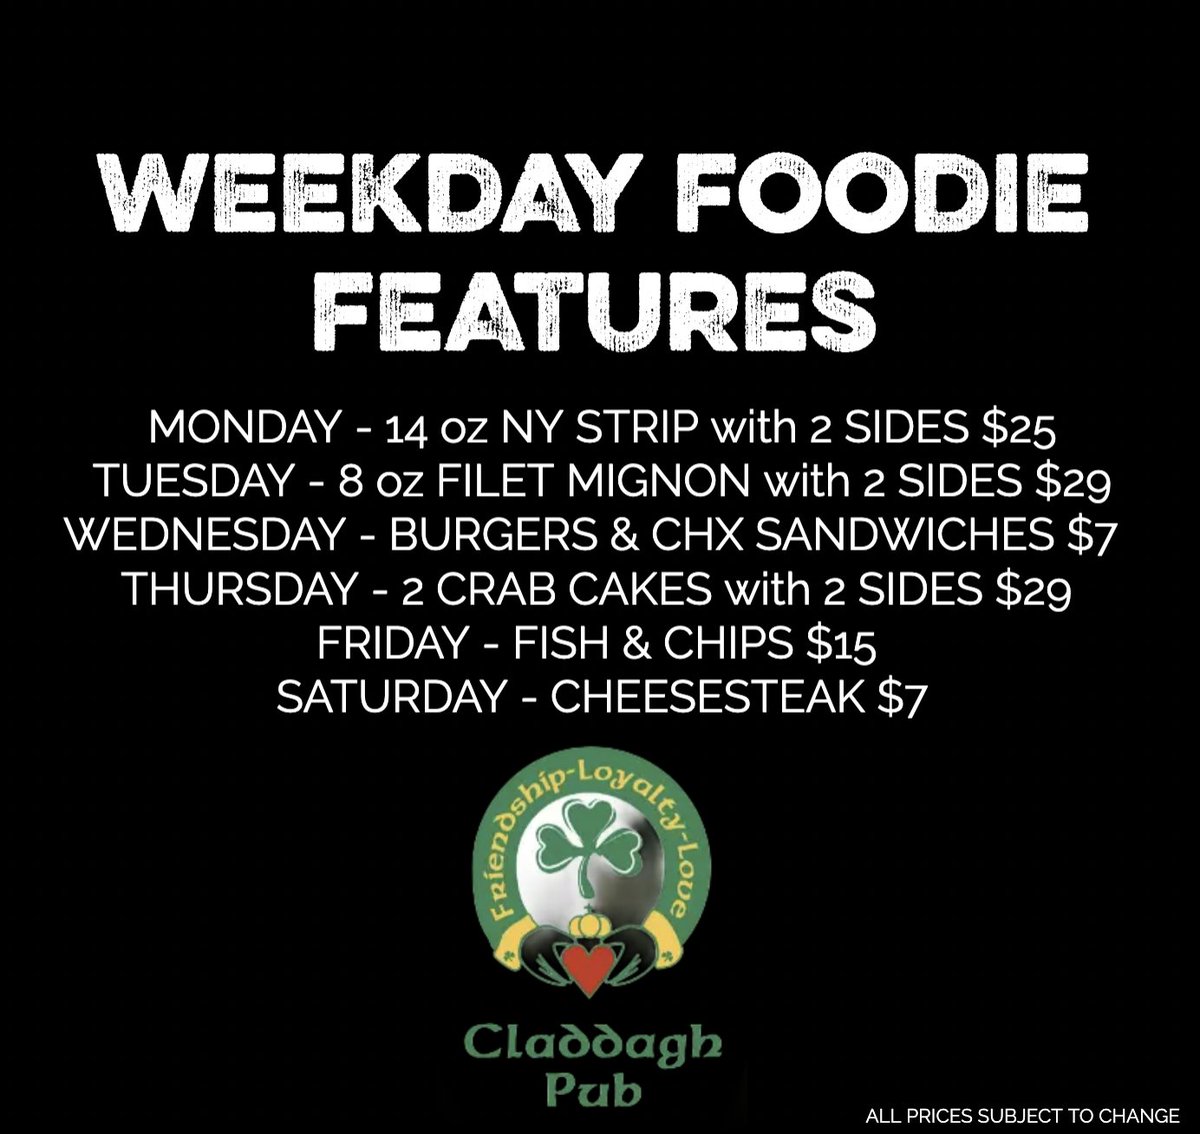 In addition to our Weekly Foodie Features we also have our Happy Hour Specials M-F 
4PM - 7PM and our Sunday Sport Specials. And don't forget about DOLLAR beers on Thursday.